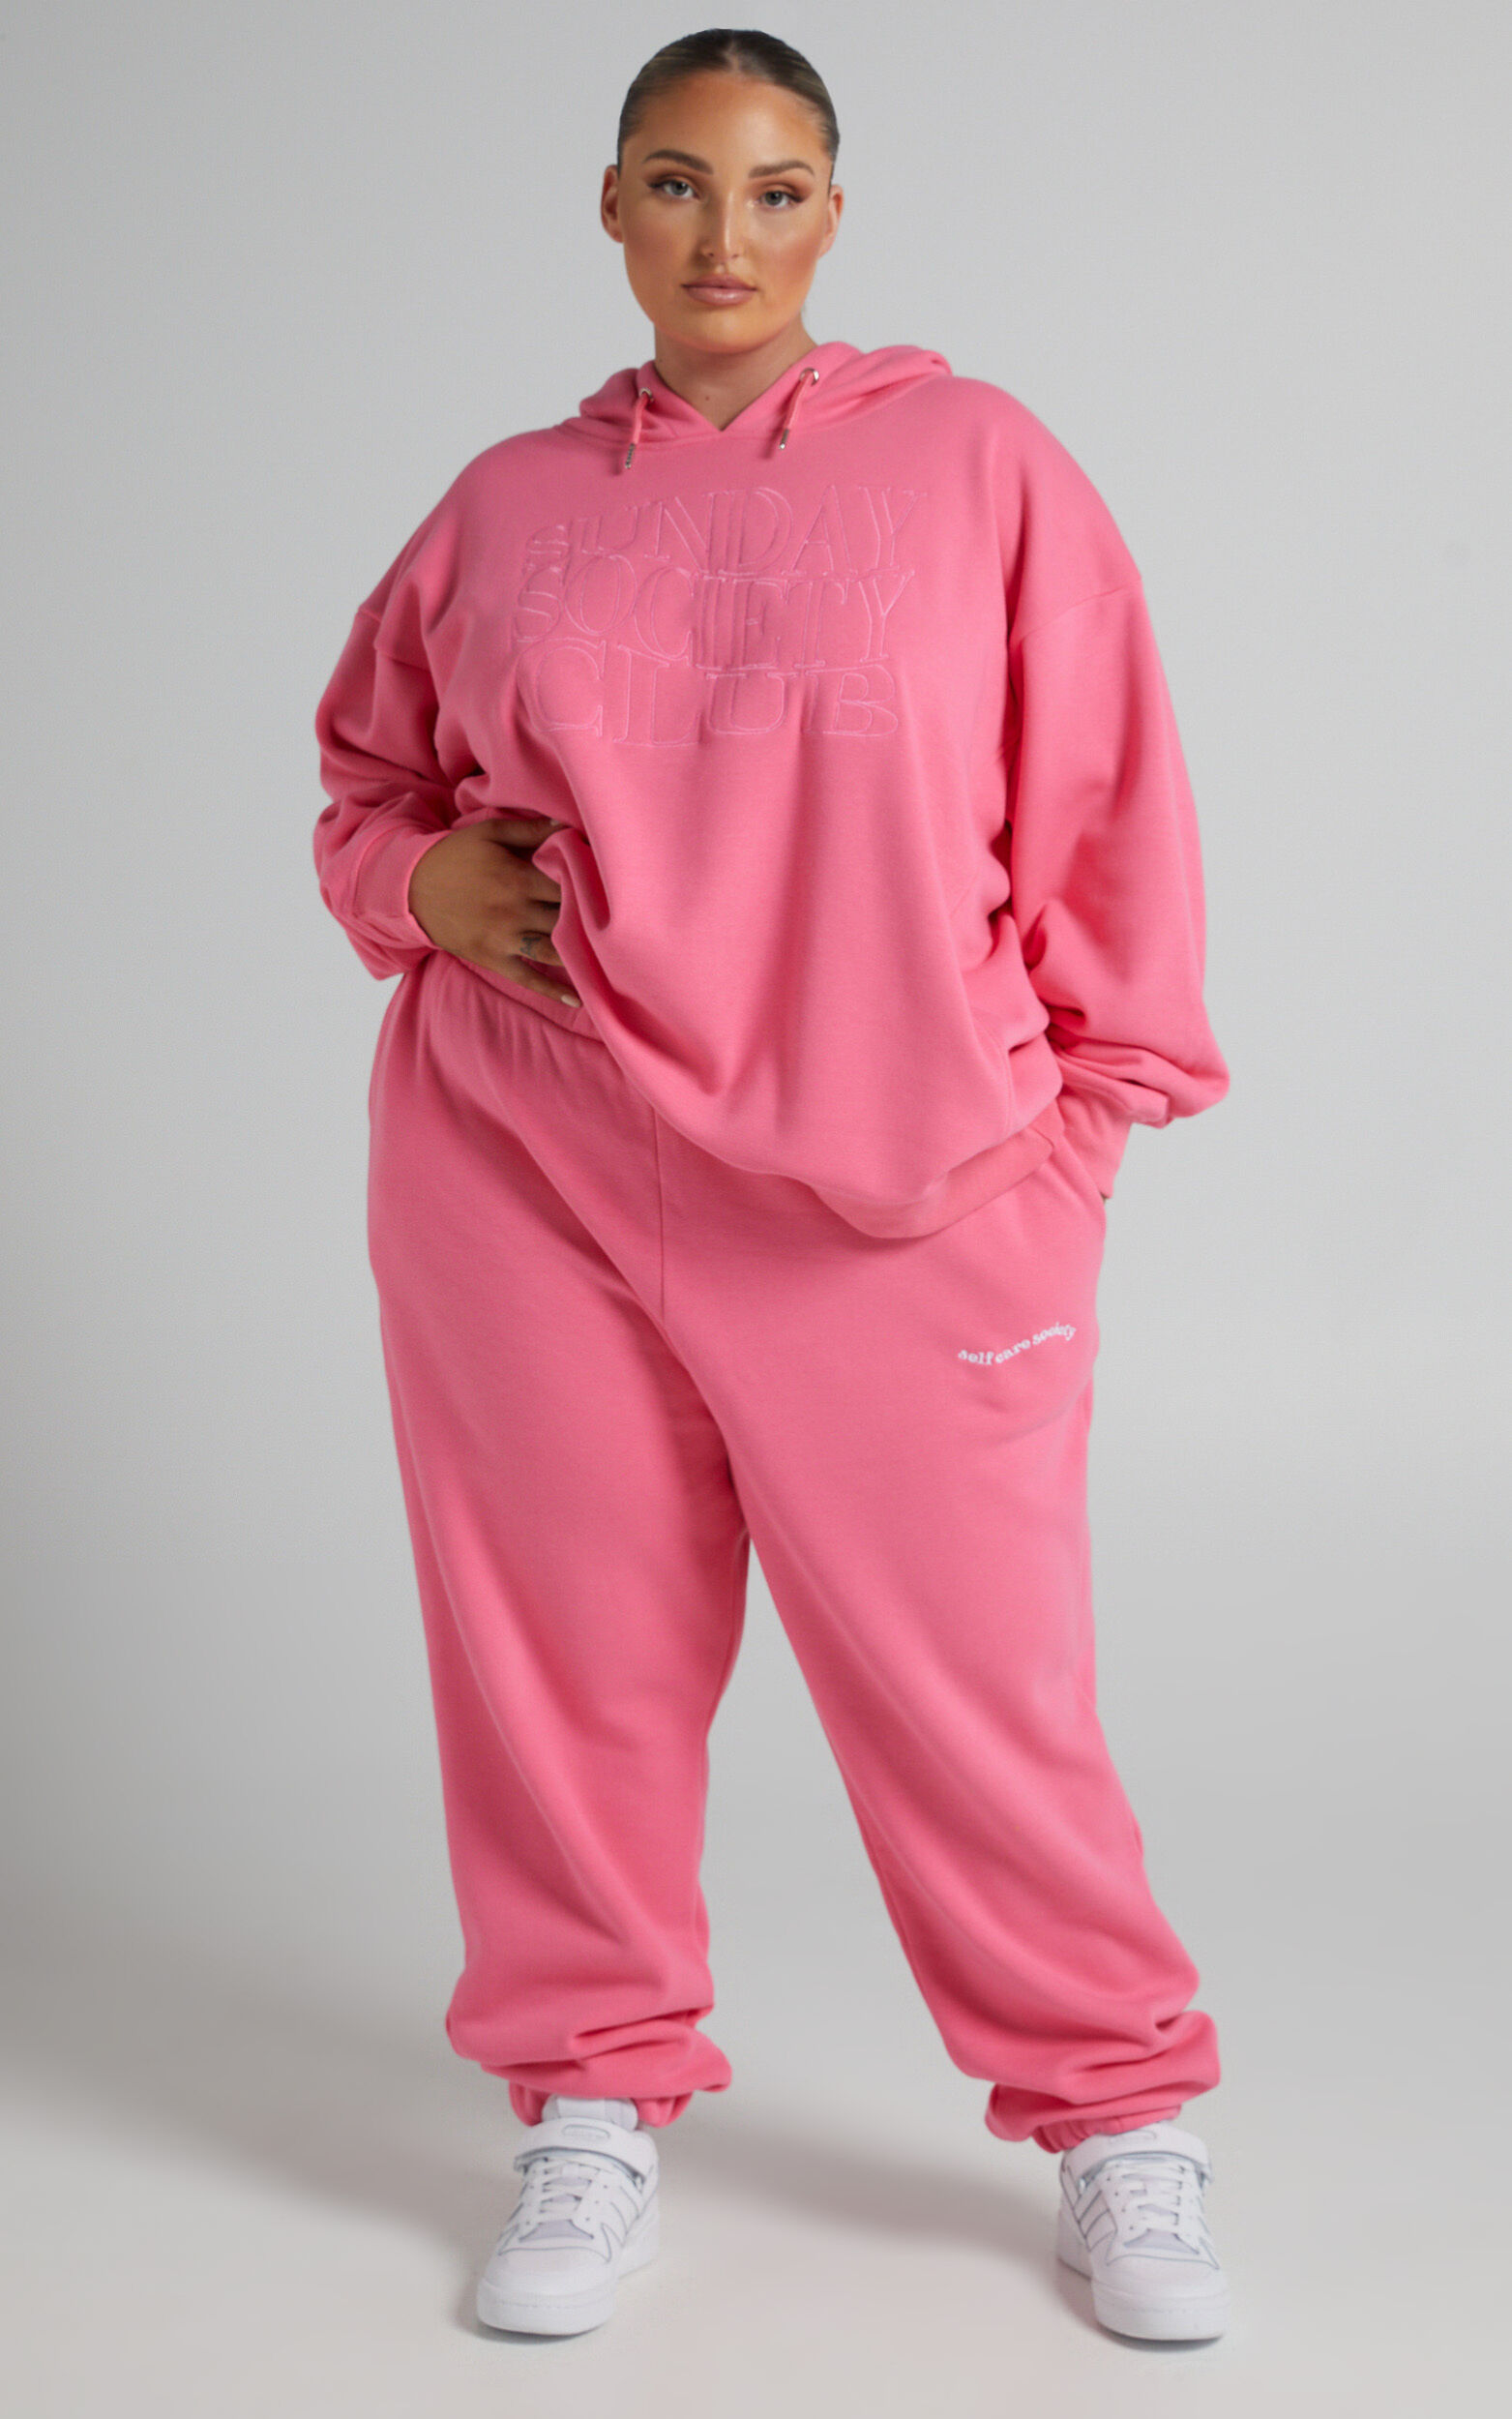 Sunday Society Club - Maddie Sweatpants in Pink - 06, PNK3, super-hi-res image number null